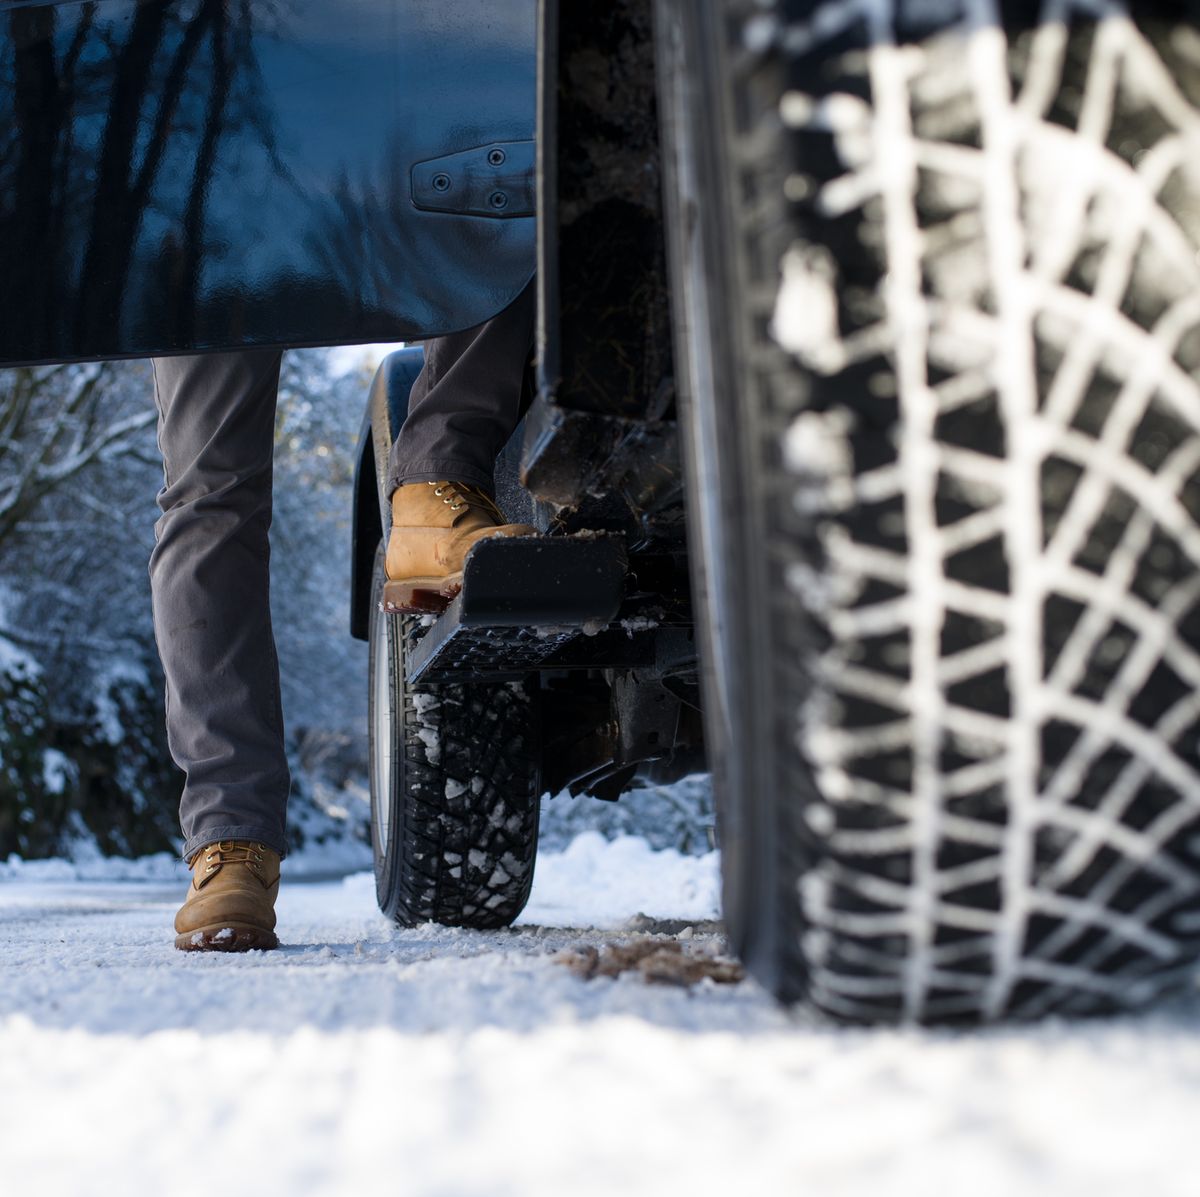 All Season Tires vs. Snow Tires  Can You Use All Season Tires in the Snow?